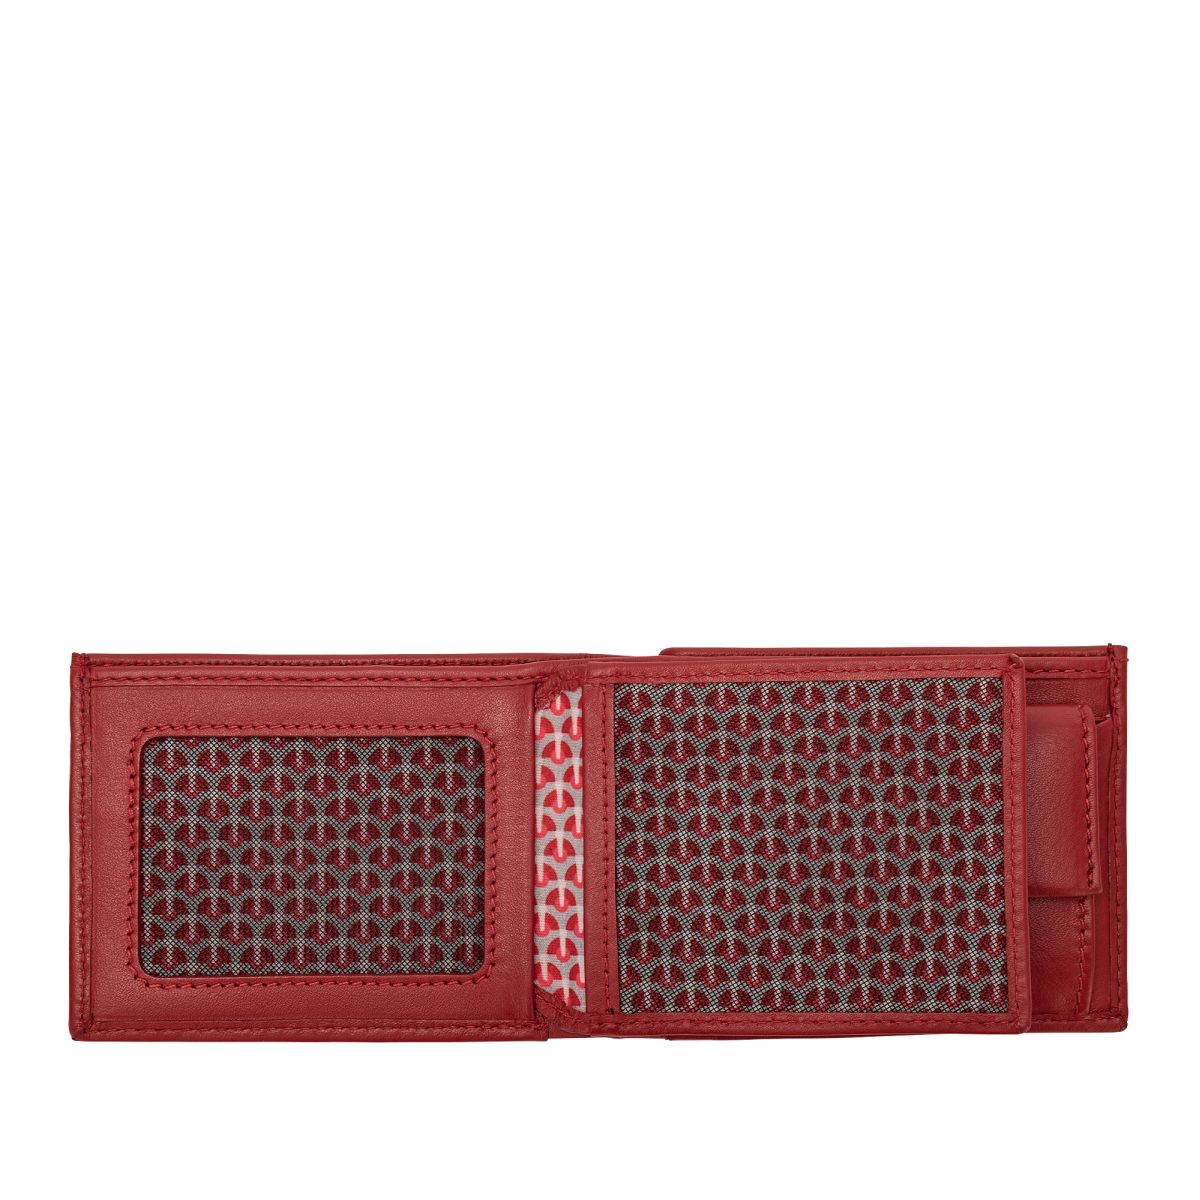 NUVOLA PELLE Small mens minimalist wallet with coins pocket - Red